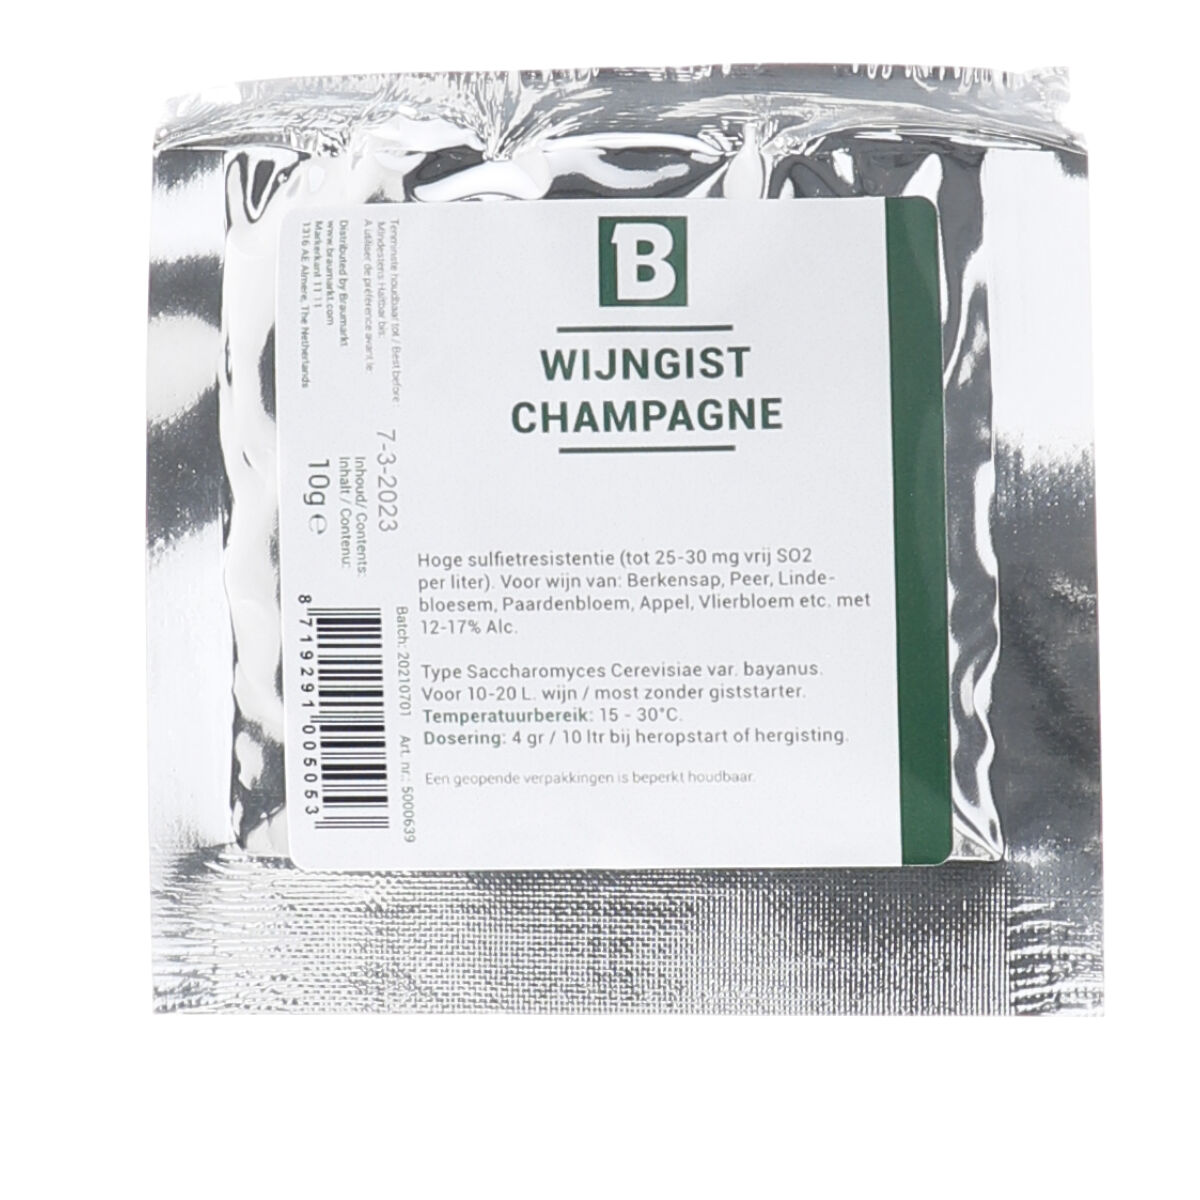 10g Active Wine Yeast Champagne Fermenter For Wine R5T3 Cider Making C8L3 